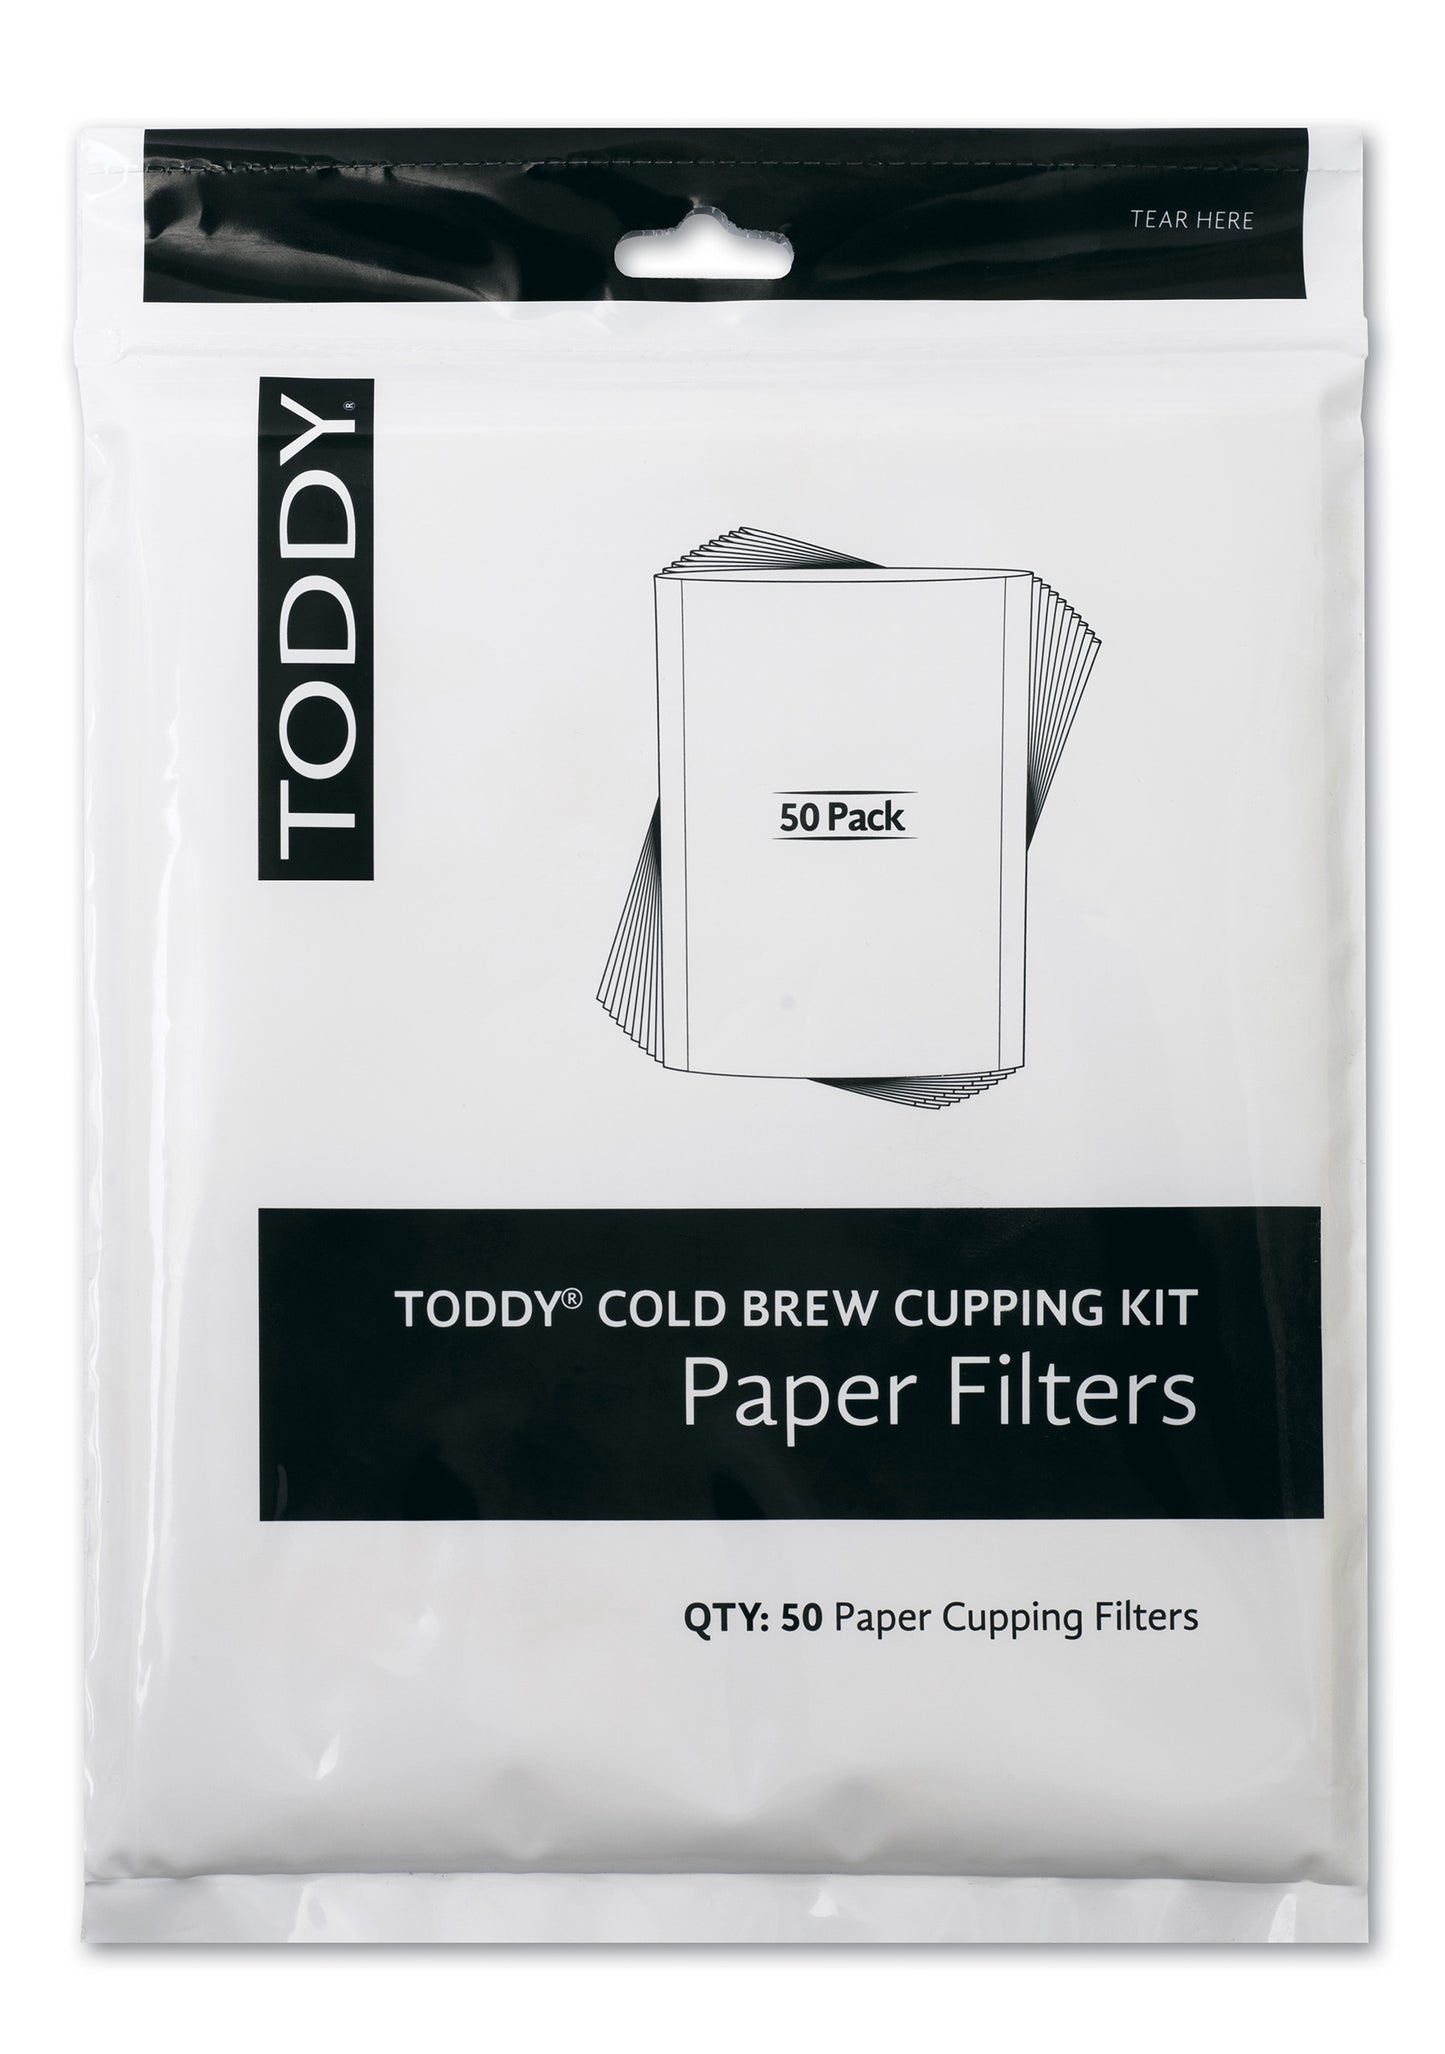 Toddy®

Cold brew filters